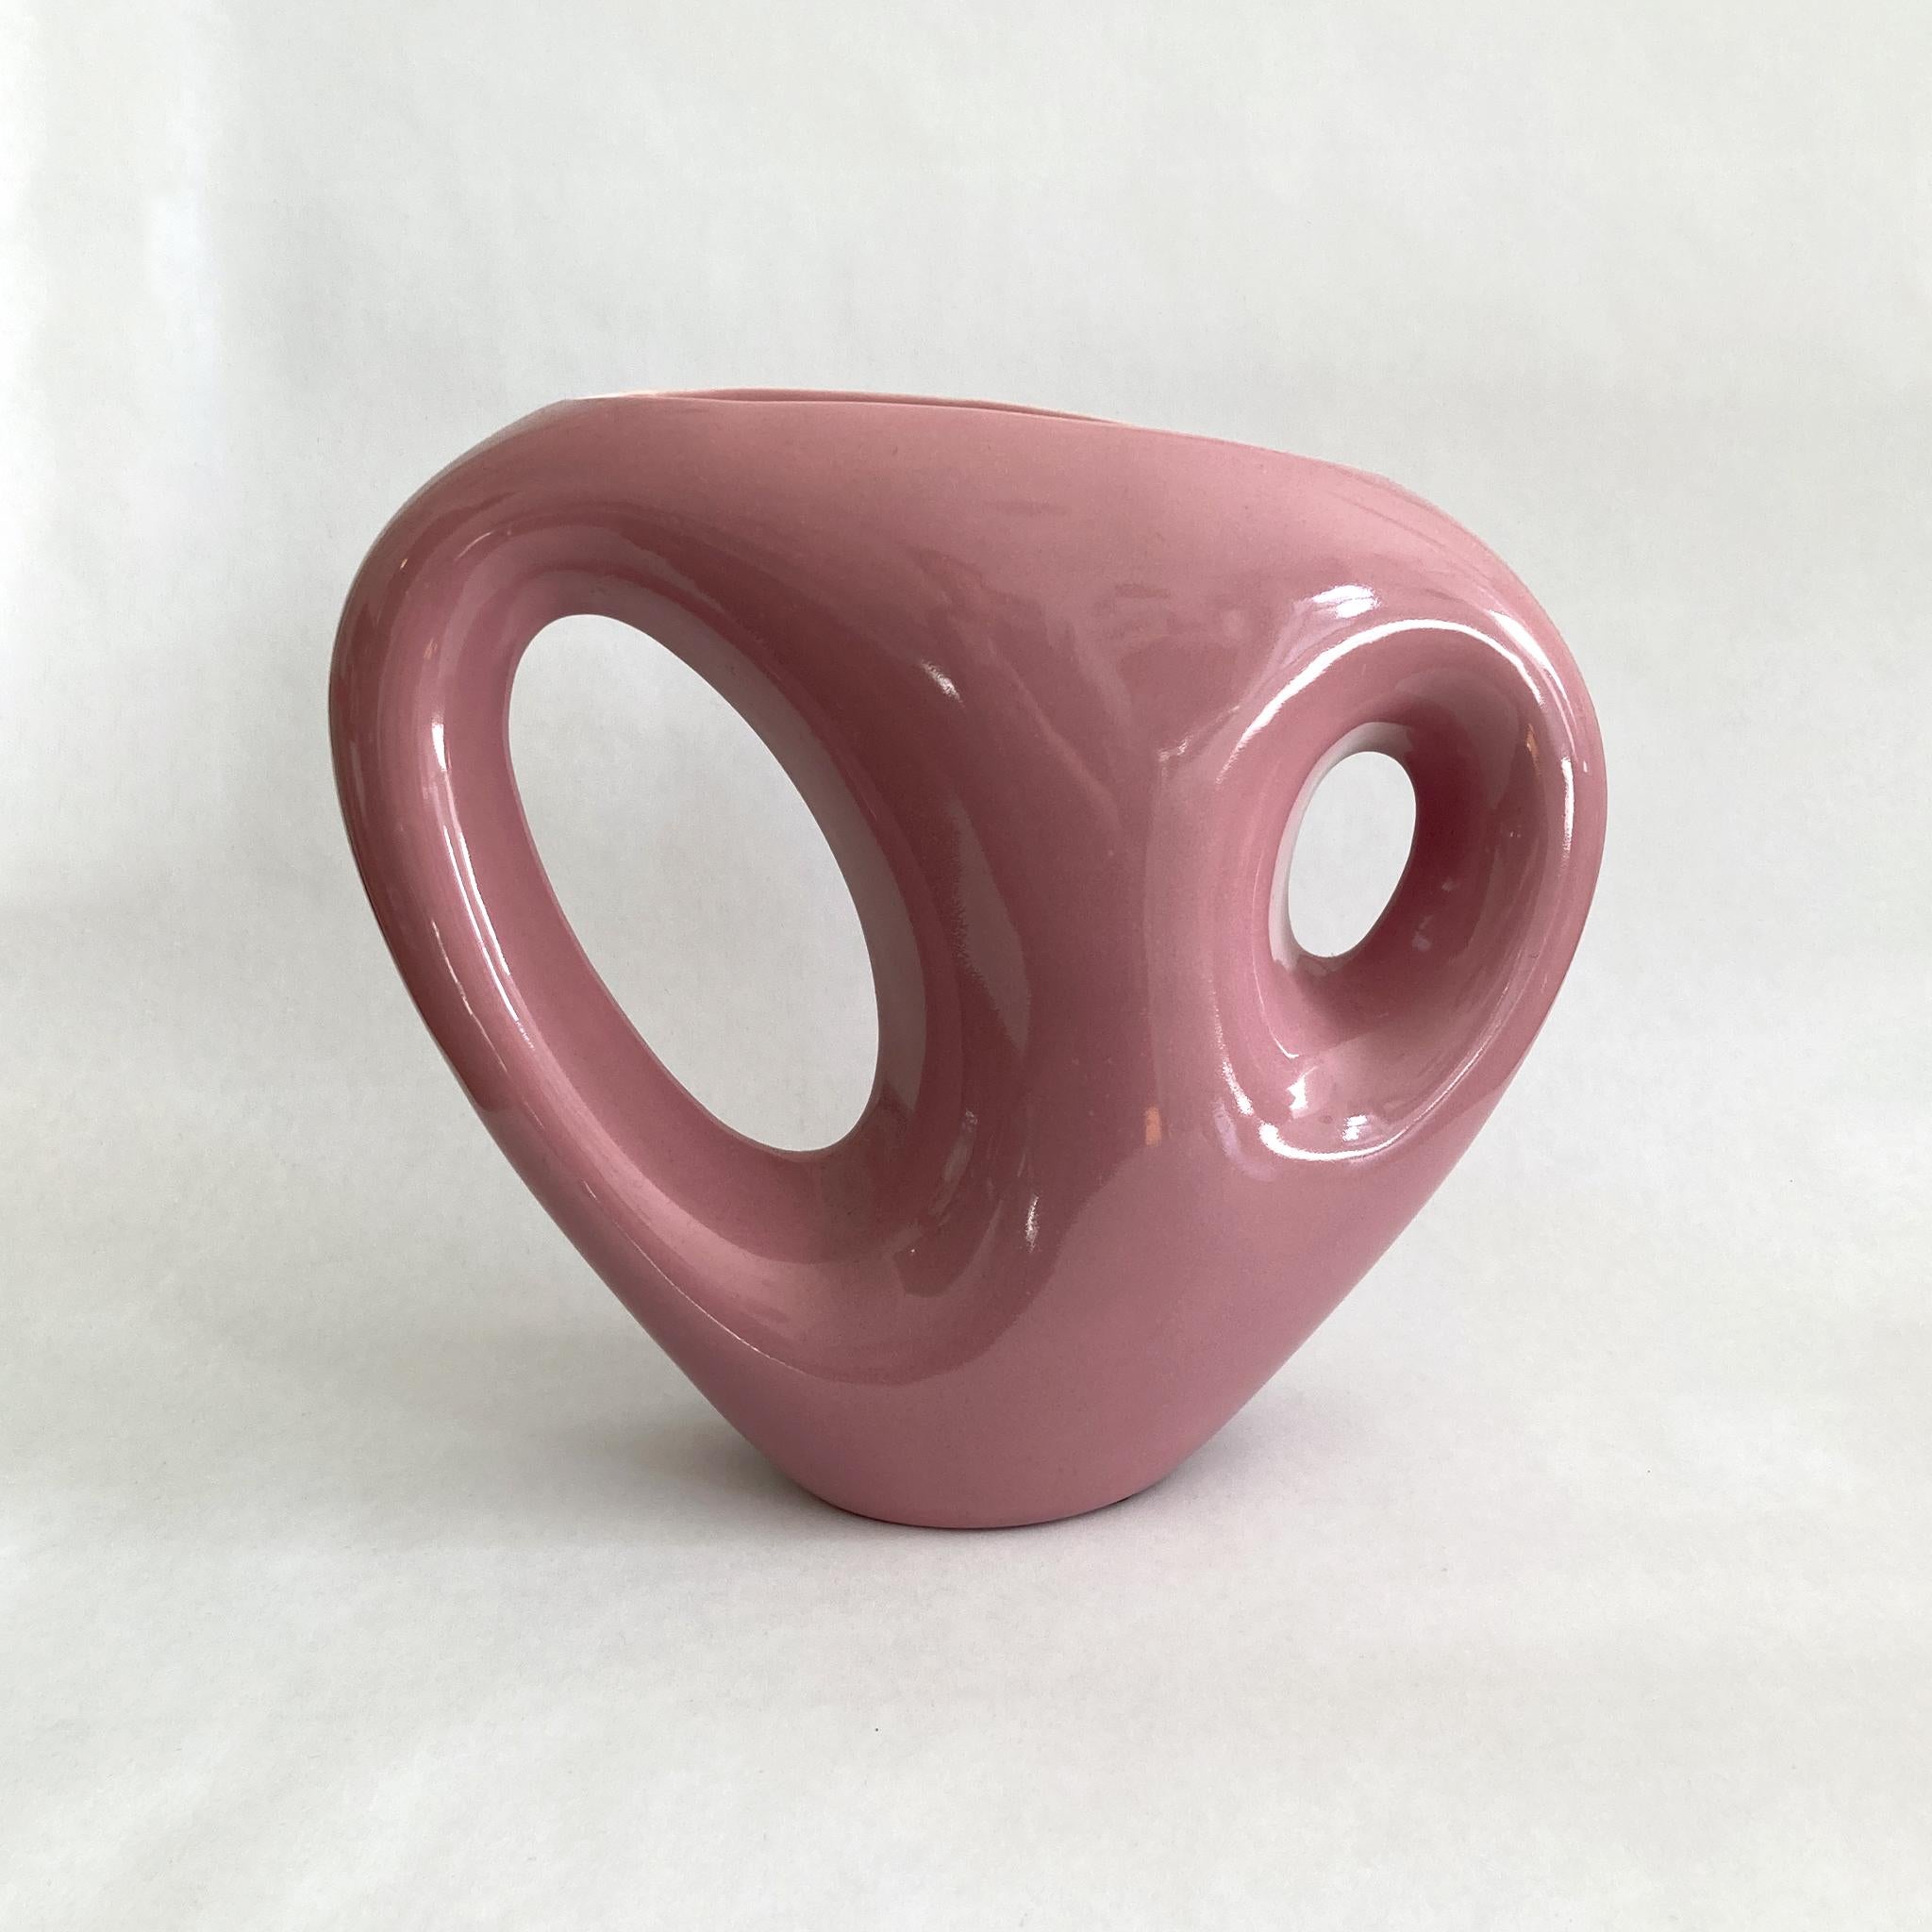 Postmodern Haeger Mauve pink abstract vase, medium size. Looks stunning on its own or as part of a group. In great condition, no crazing or cracks. Measures: 
H 9